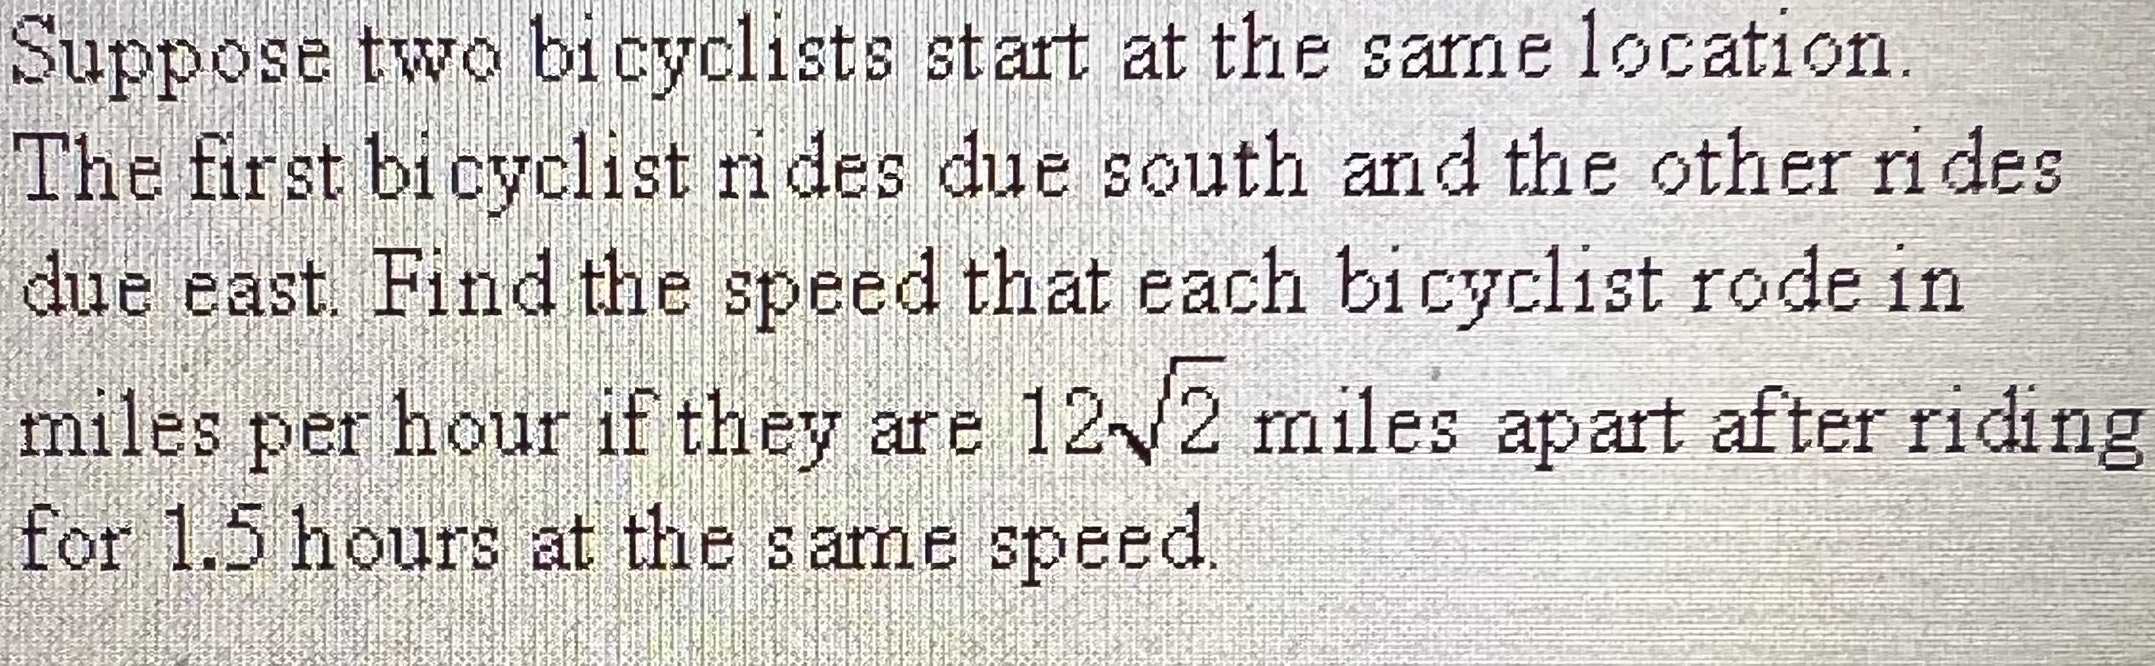 Suppose two bicyclists start at the same location....